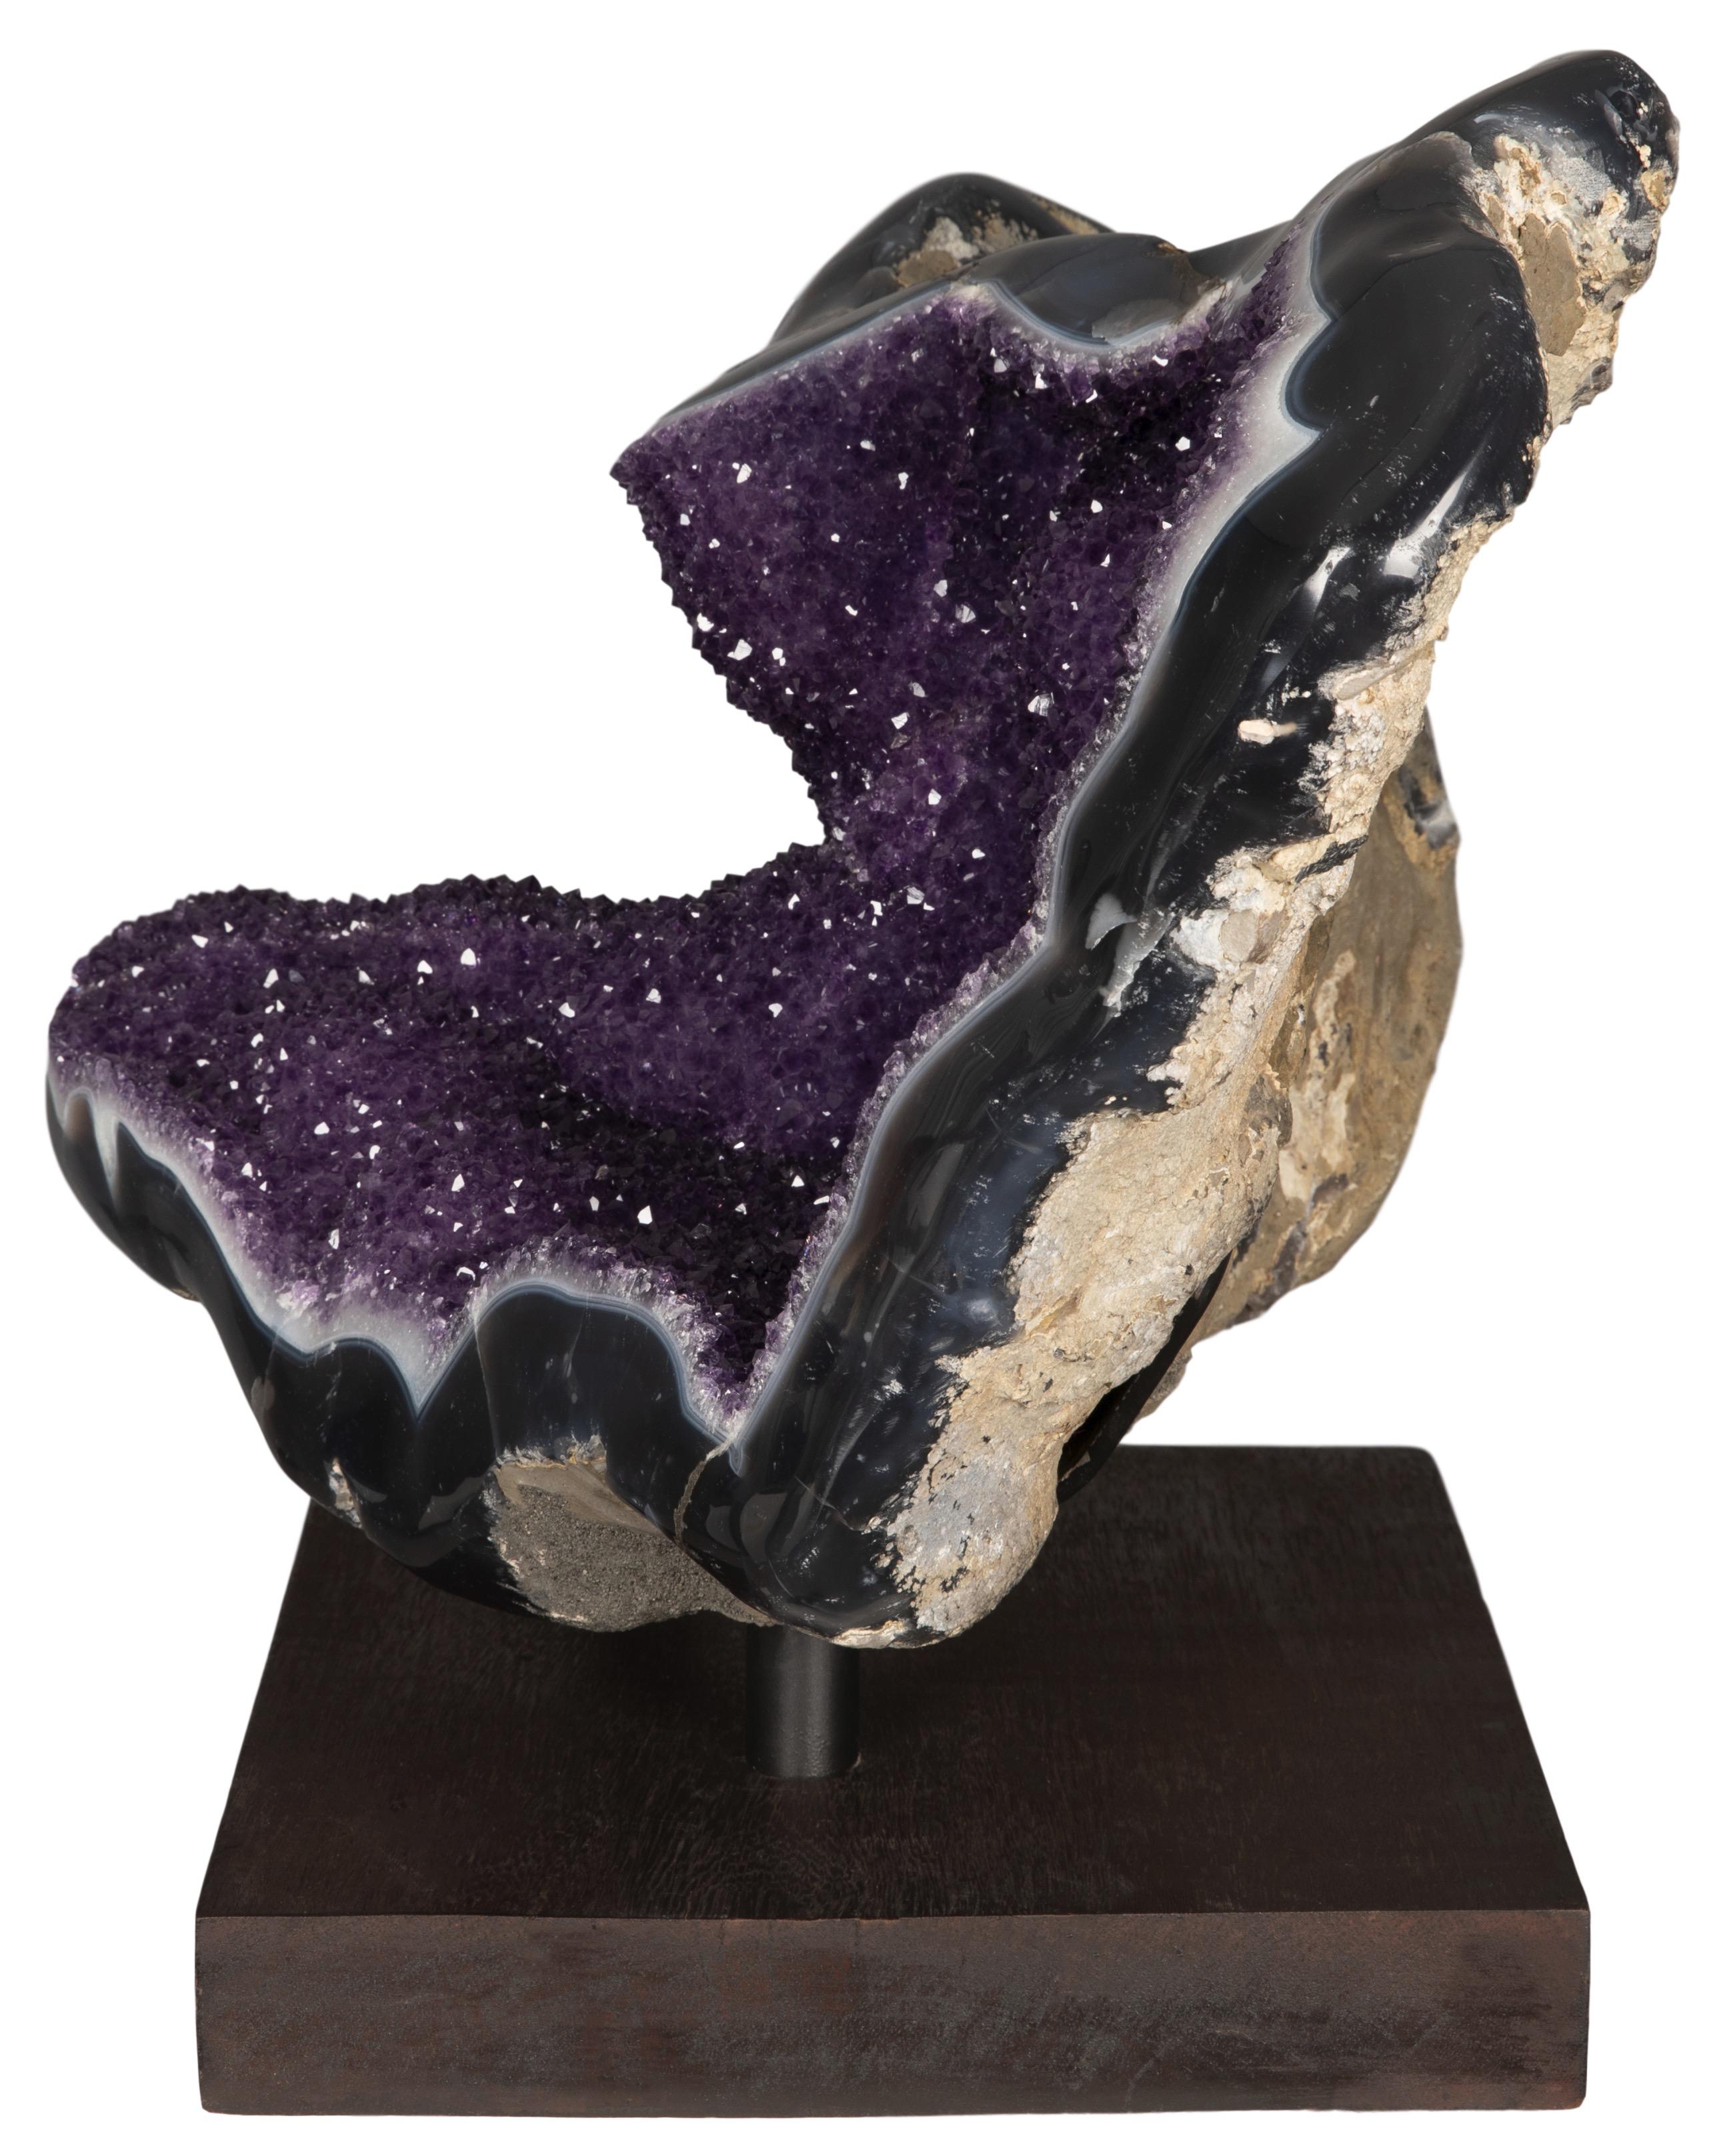 The electric intensity of this piece's coloration makes it both stunning and unique. The sparkling color and natural wave-like form makes for a hypnotic sculpture evoking a sense of movement. 

Its shape allows us to imagine how this geode was